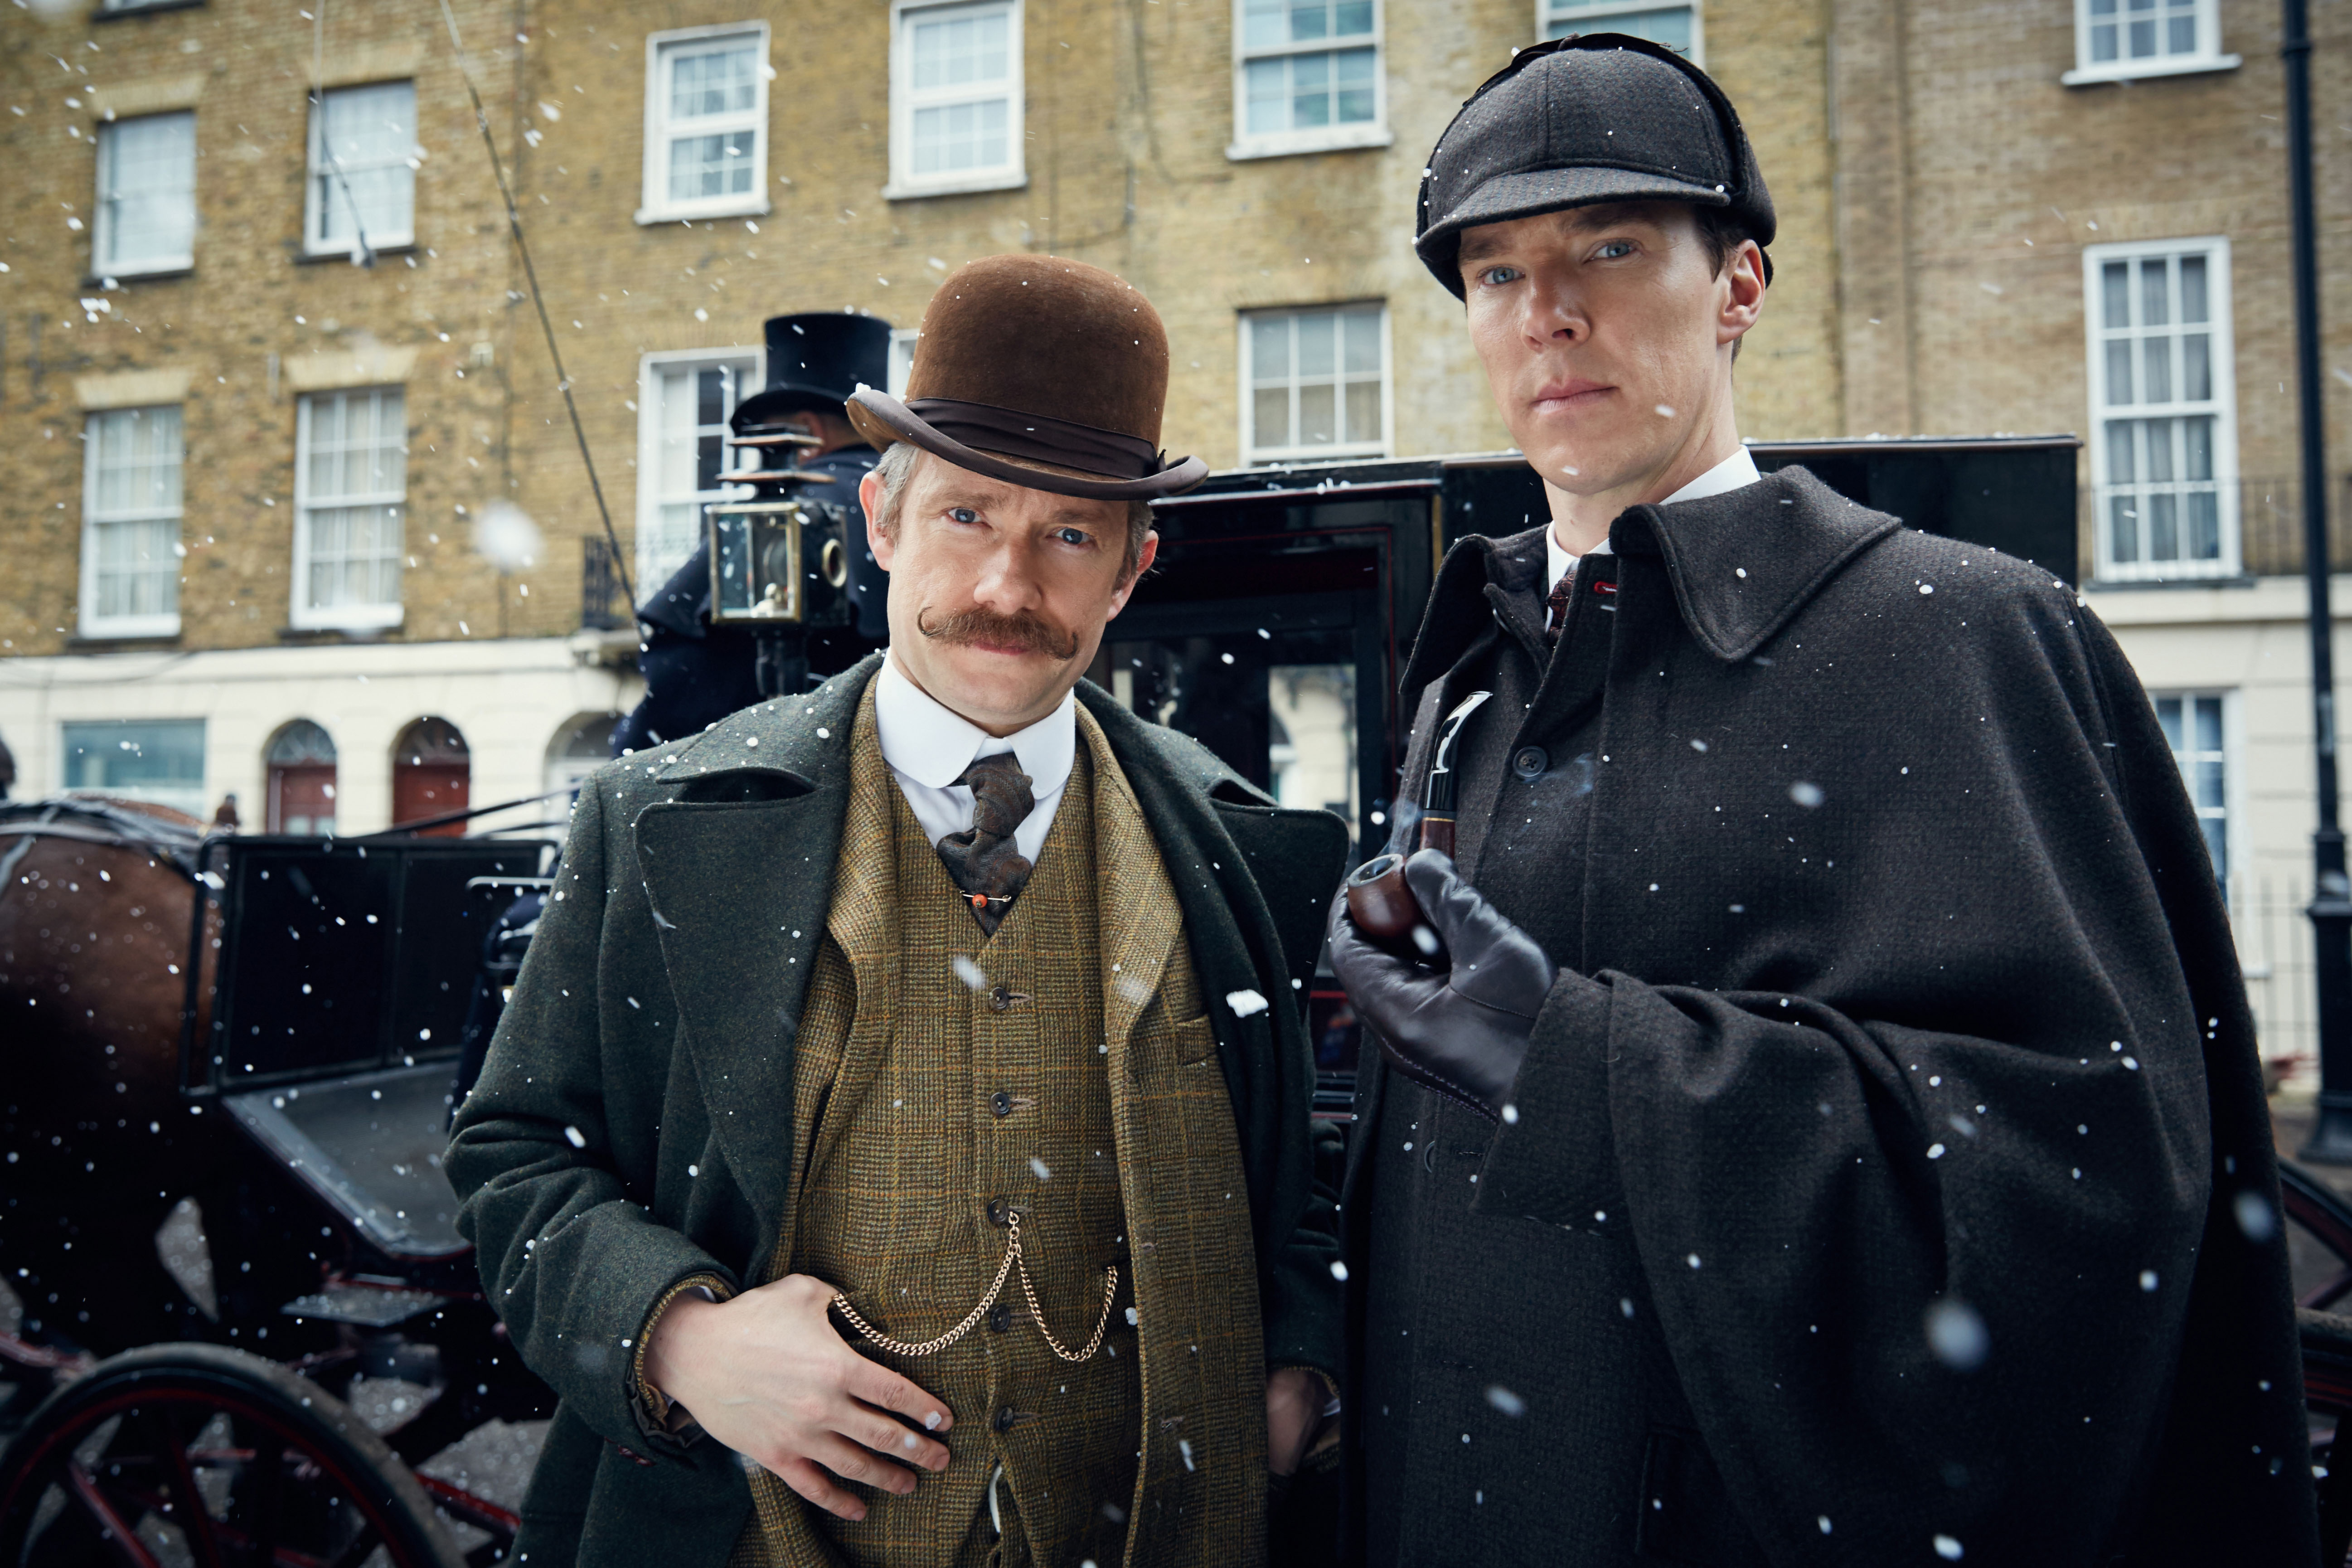 Sherlock: The Abominable Bride Promises a 'Proper Gothic Ghost Story'